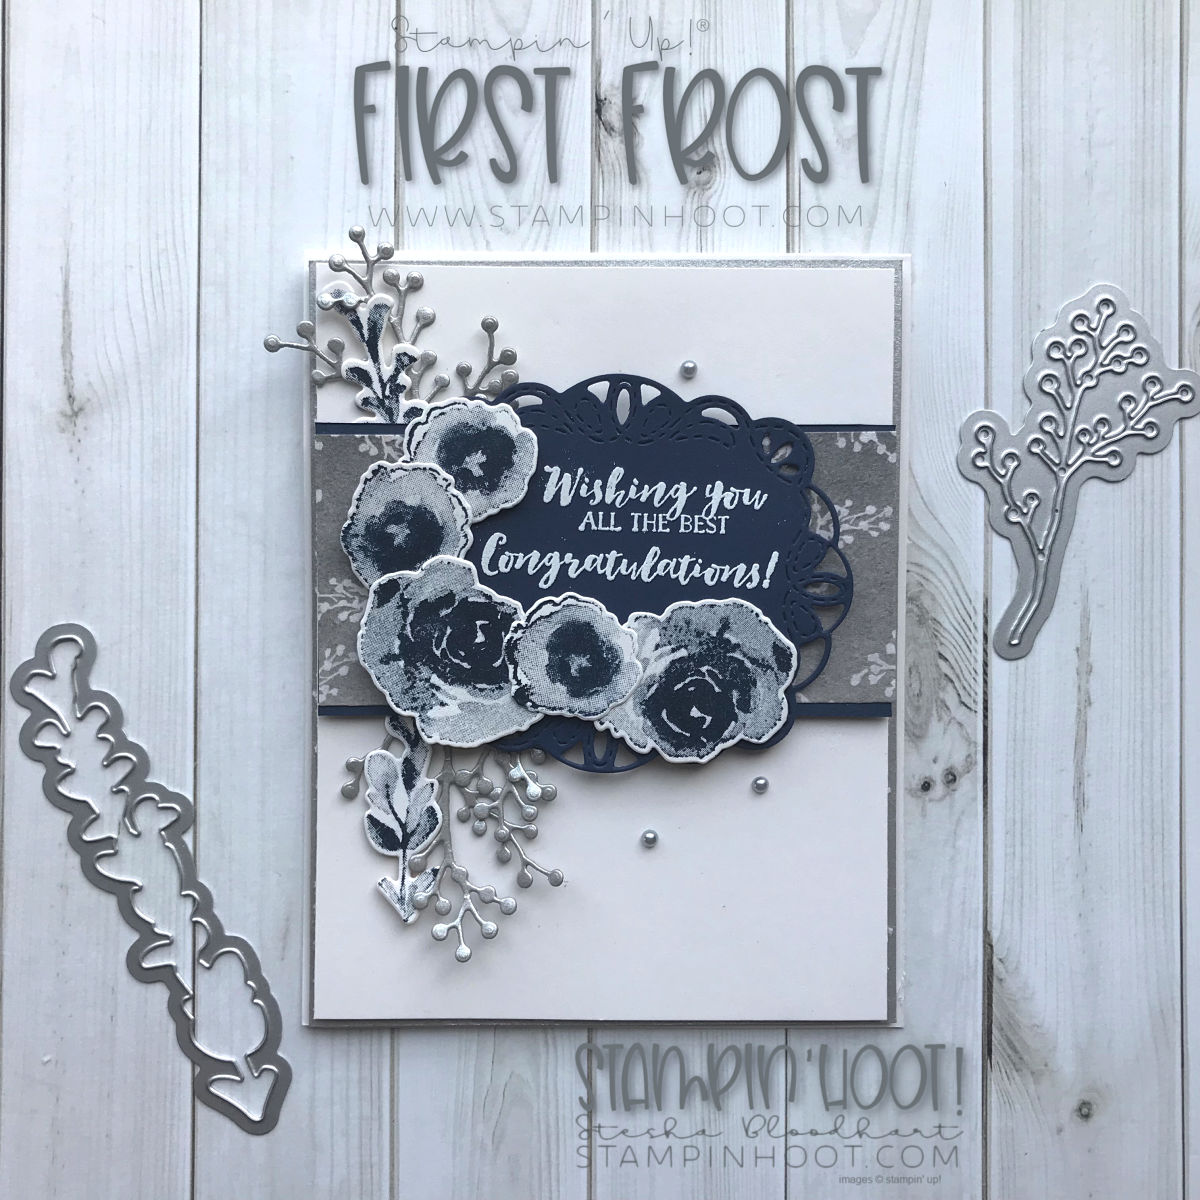 First Frost Bundle by Stampin' Up! Wedding Card created by Stesha Bloodhart, Stampin' Hoot! #steshabloodhart #stampinhoot